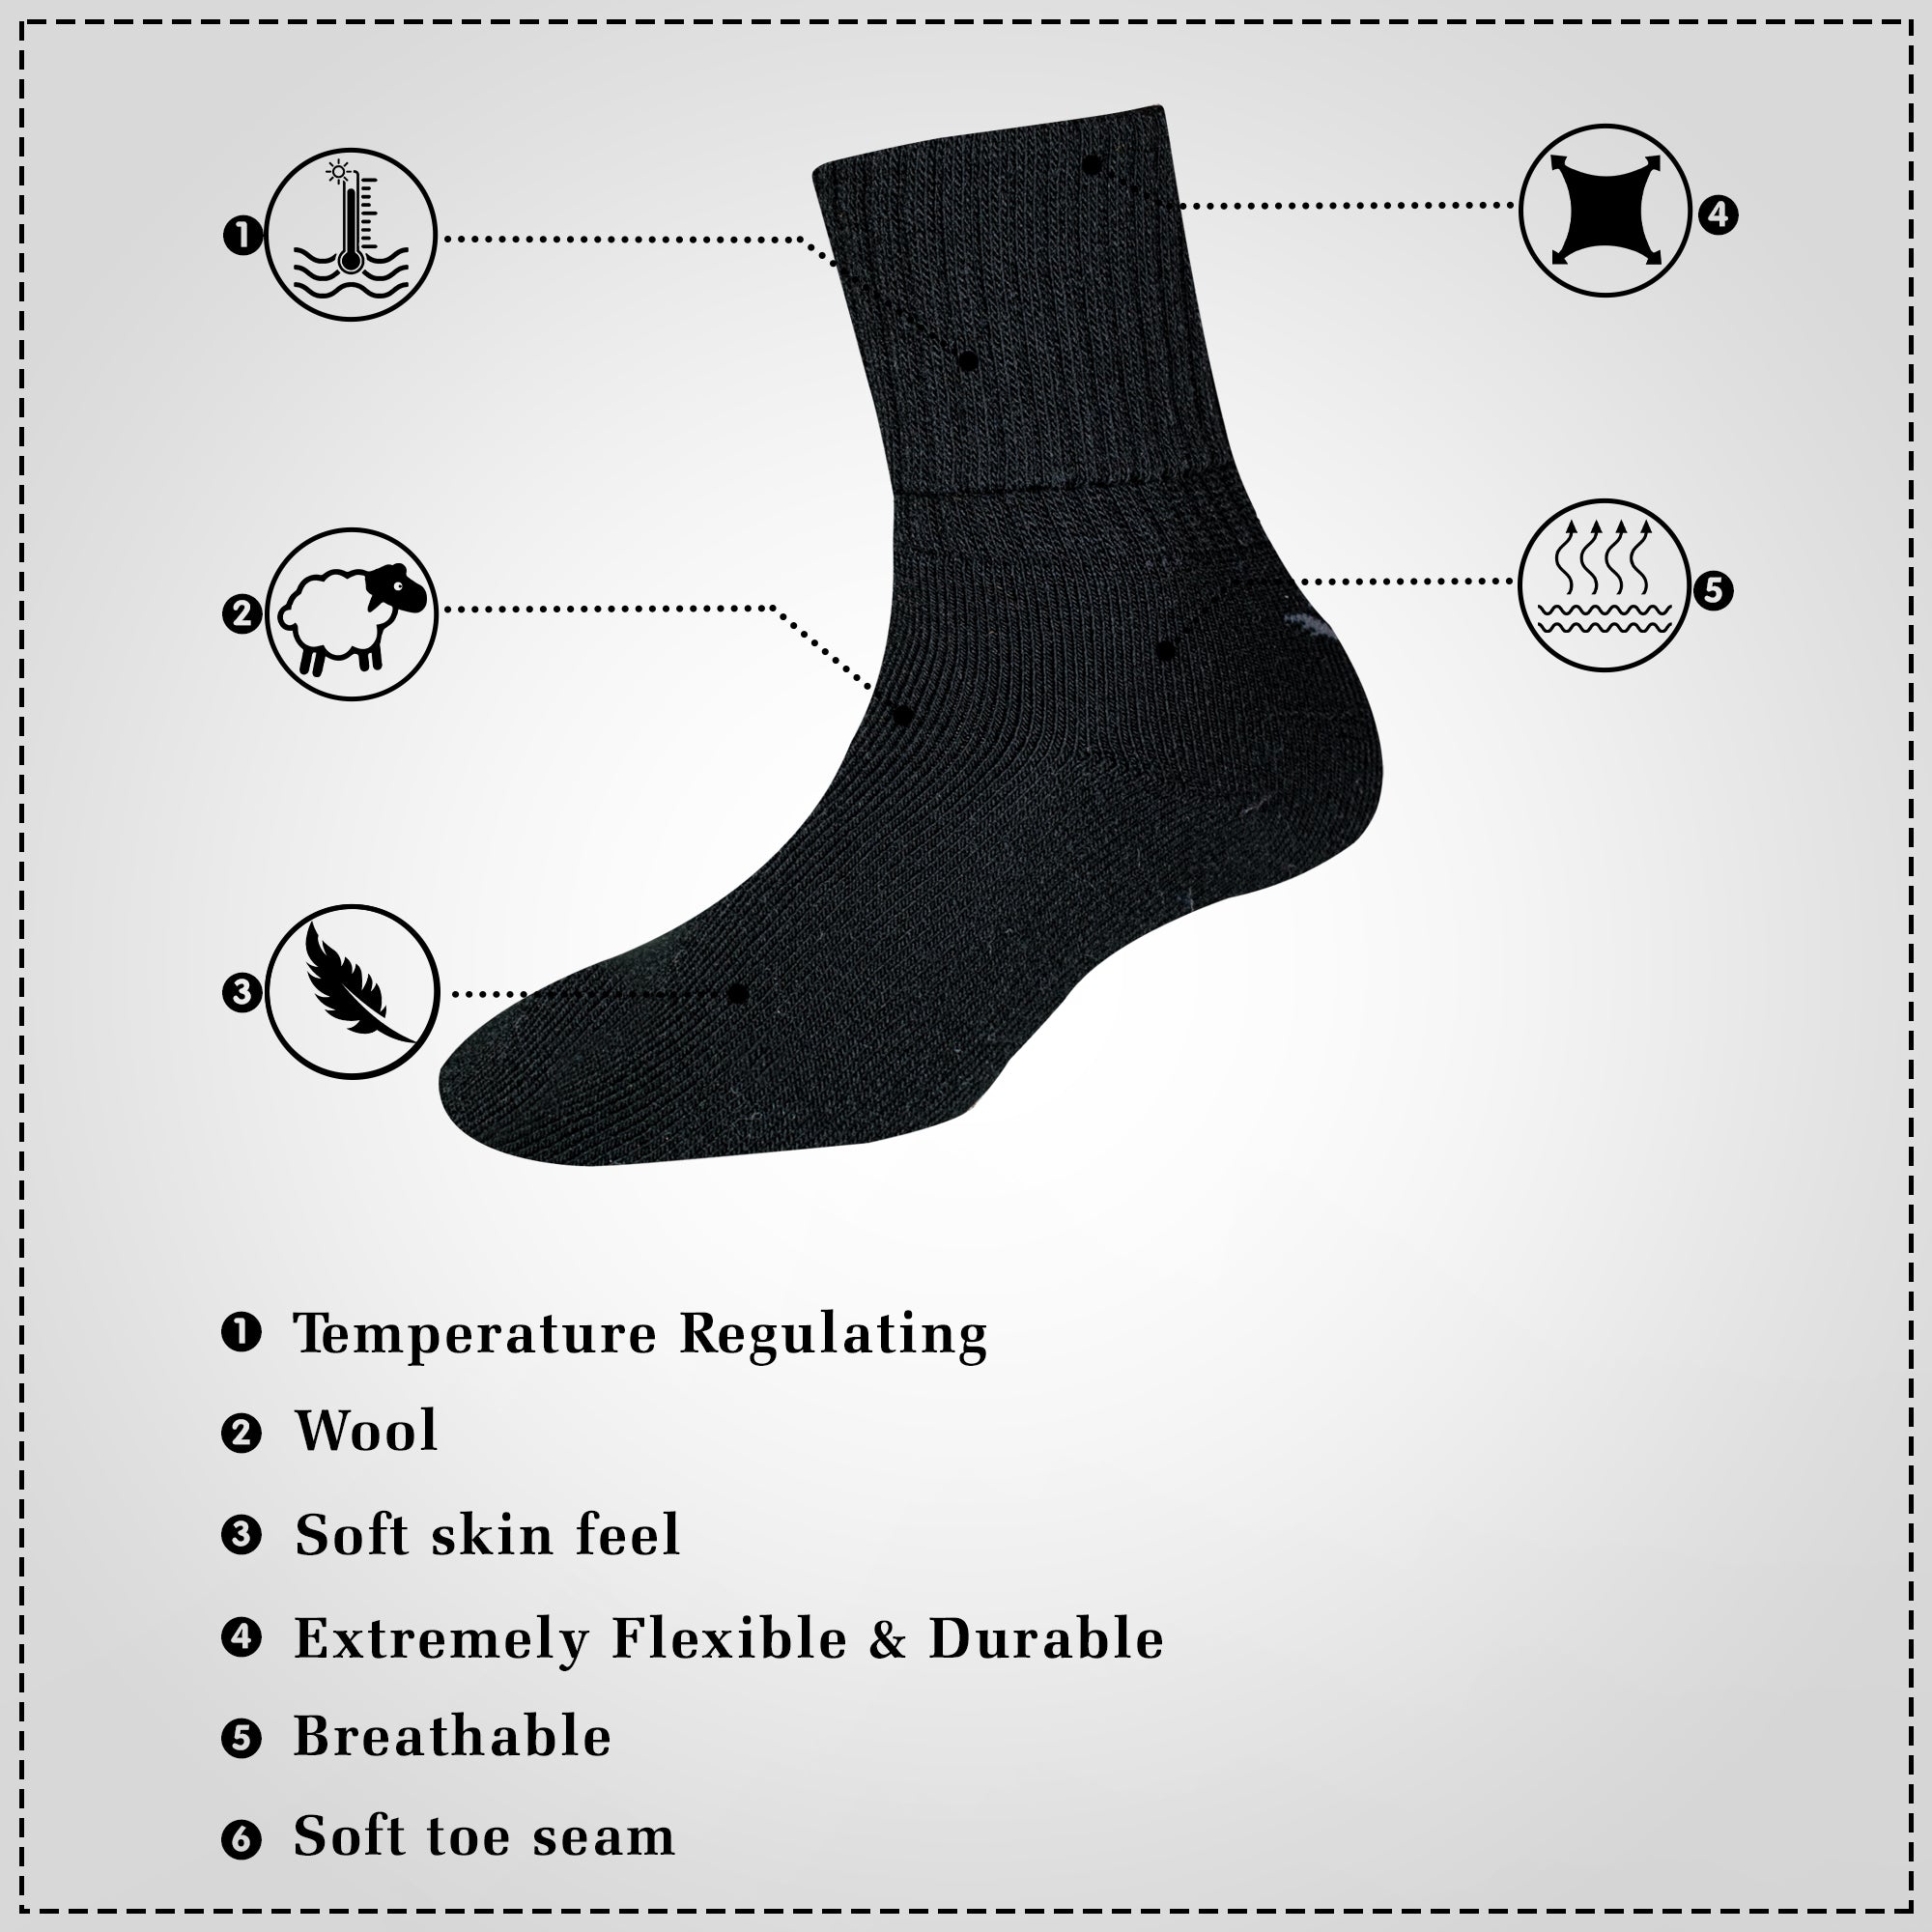 Young Wings Womens Woolen Non-Thumb Socks 700T 01 - Ankle Length - Pack of 3